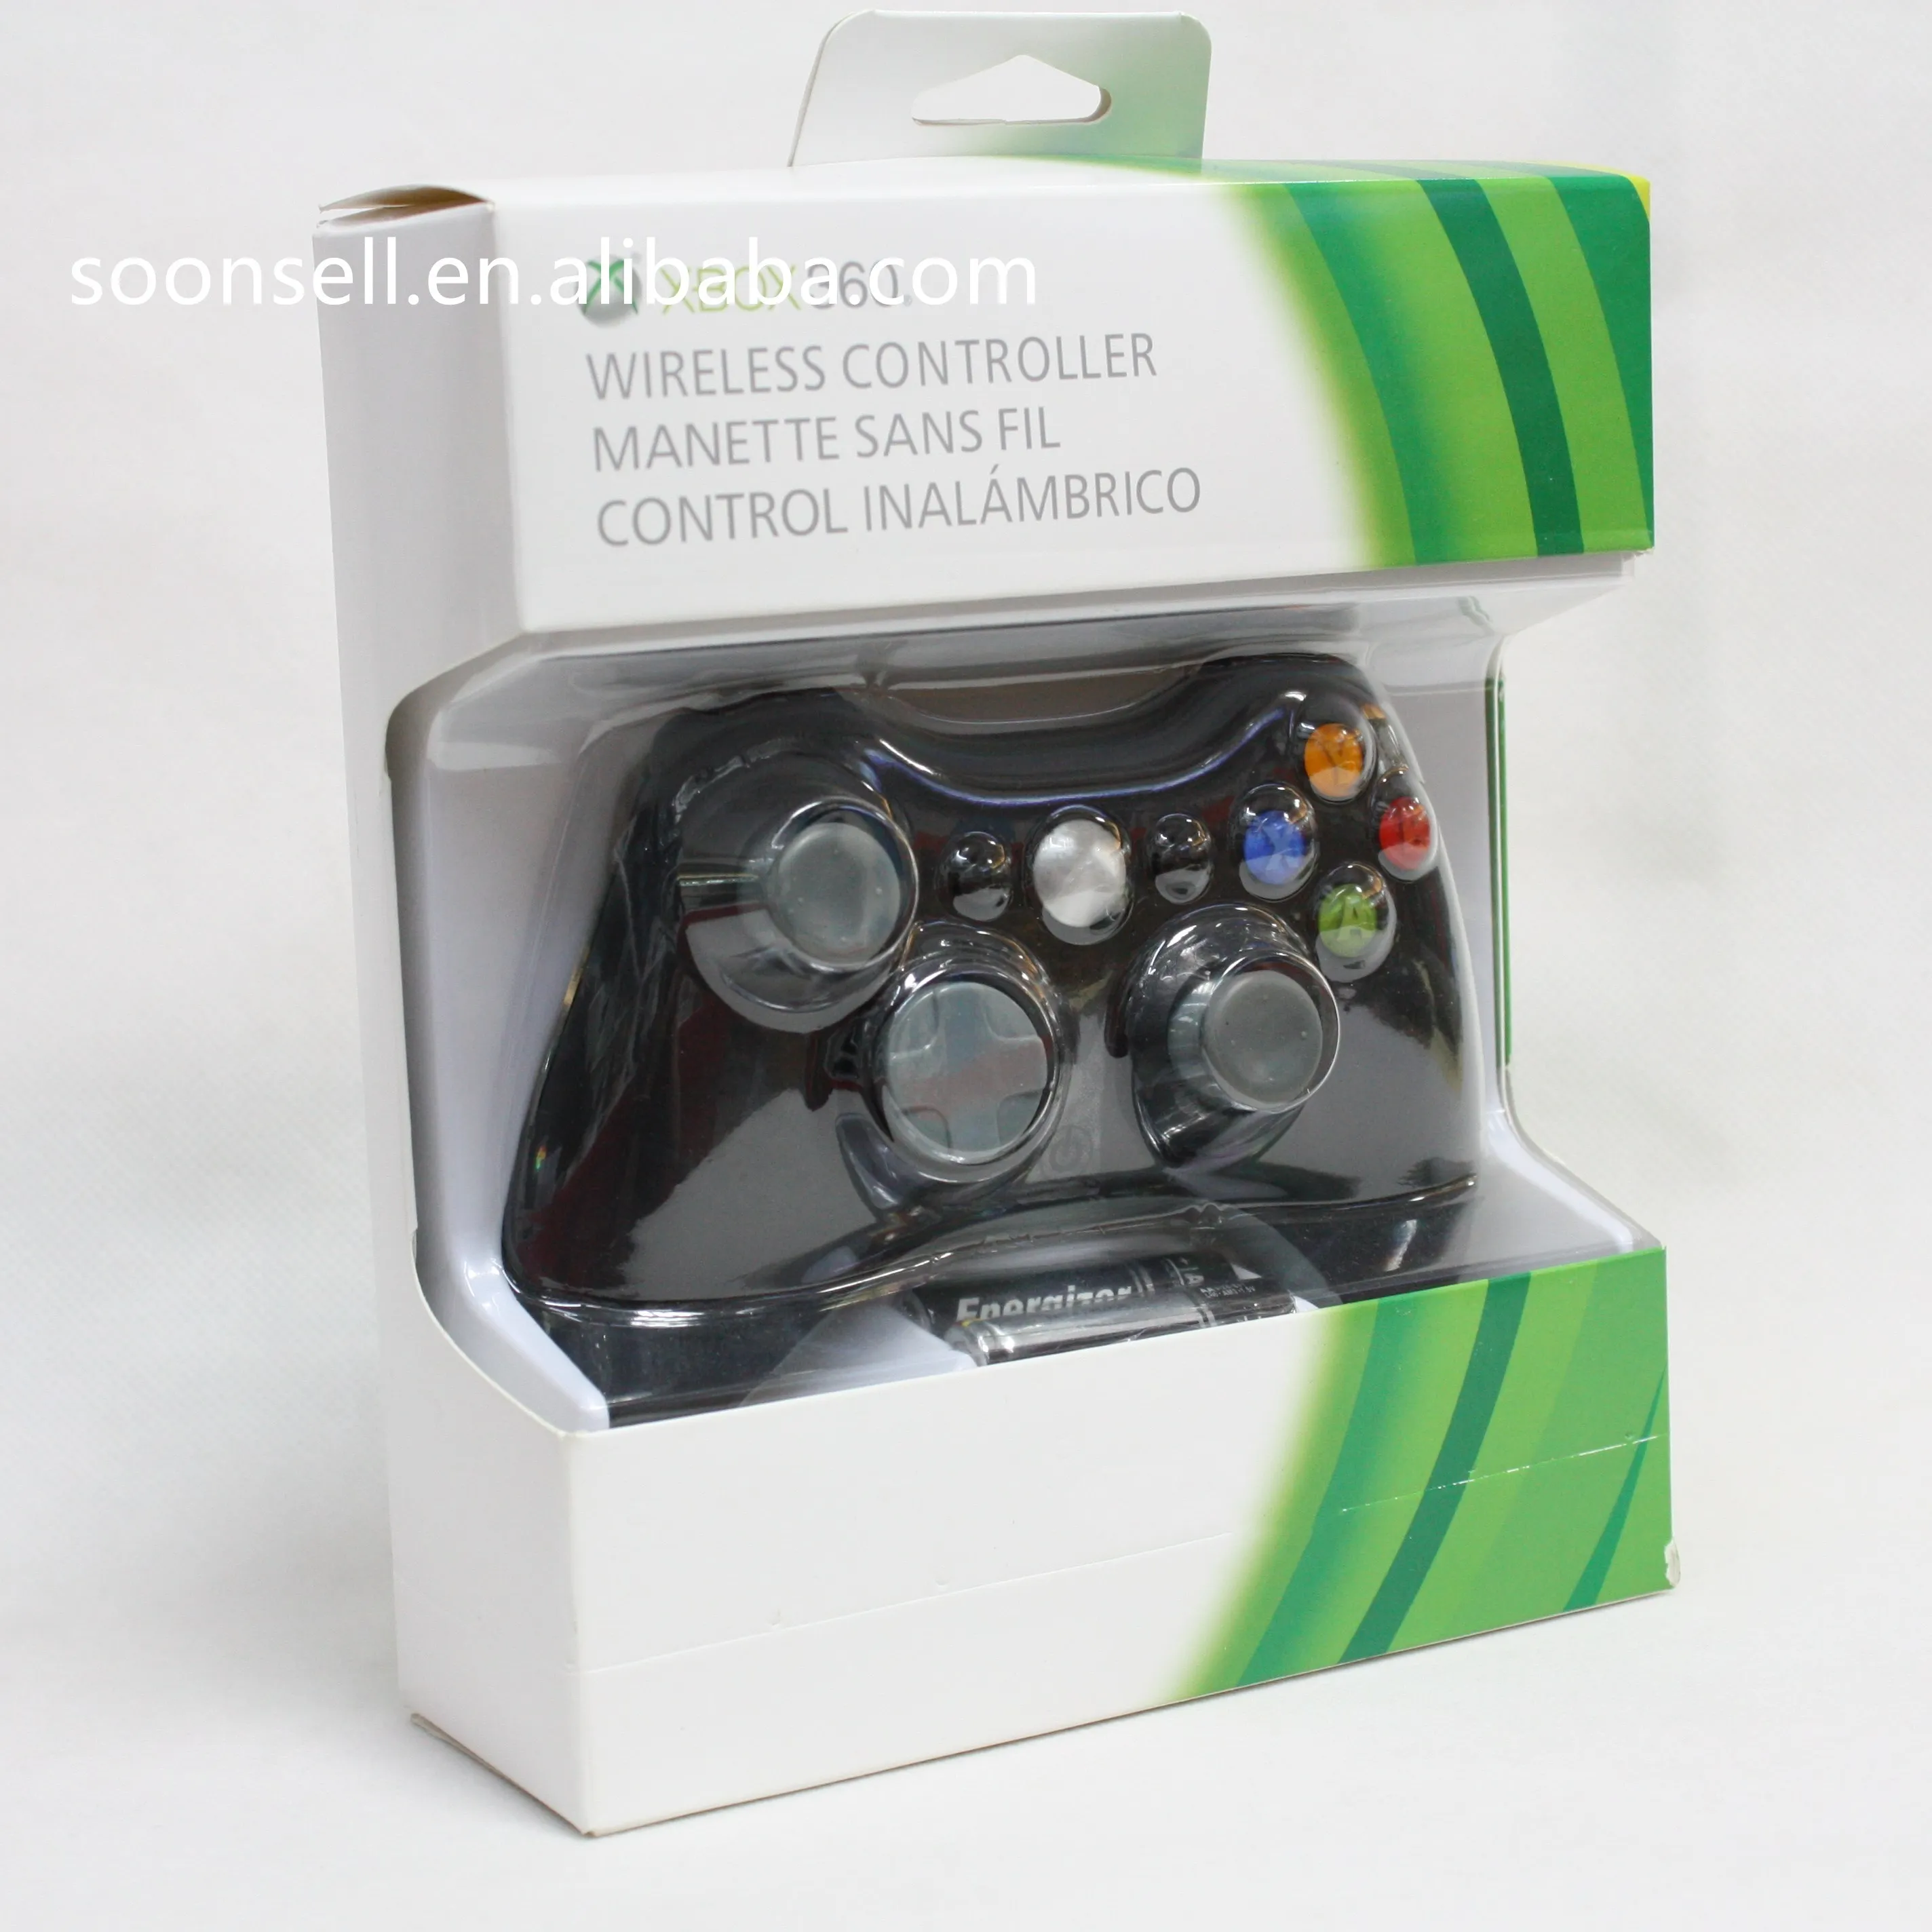 

Free Shipping 10pcs By DHL!!! Hot-Sale Product Wired Gamepad Game Controller for Xbox 360 Joystick (Original and refurbished)